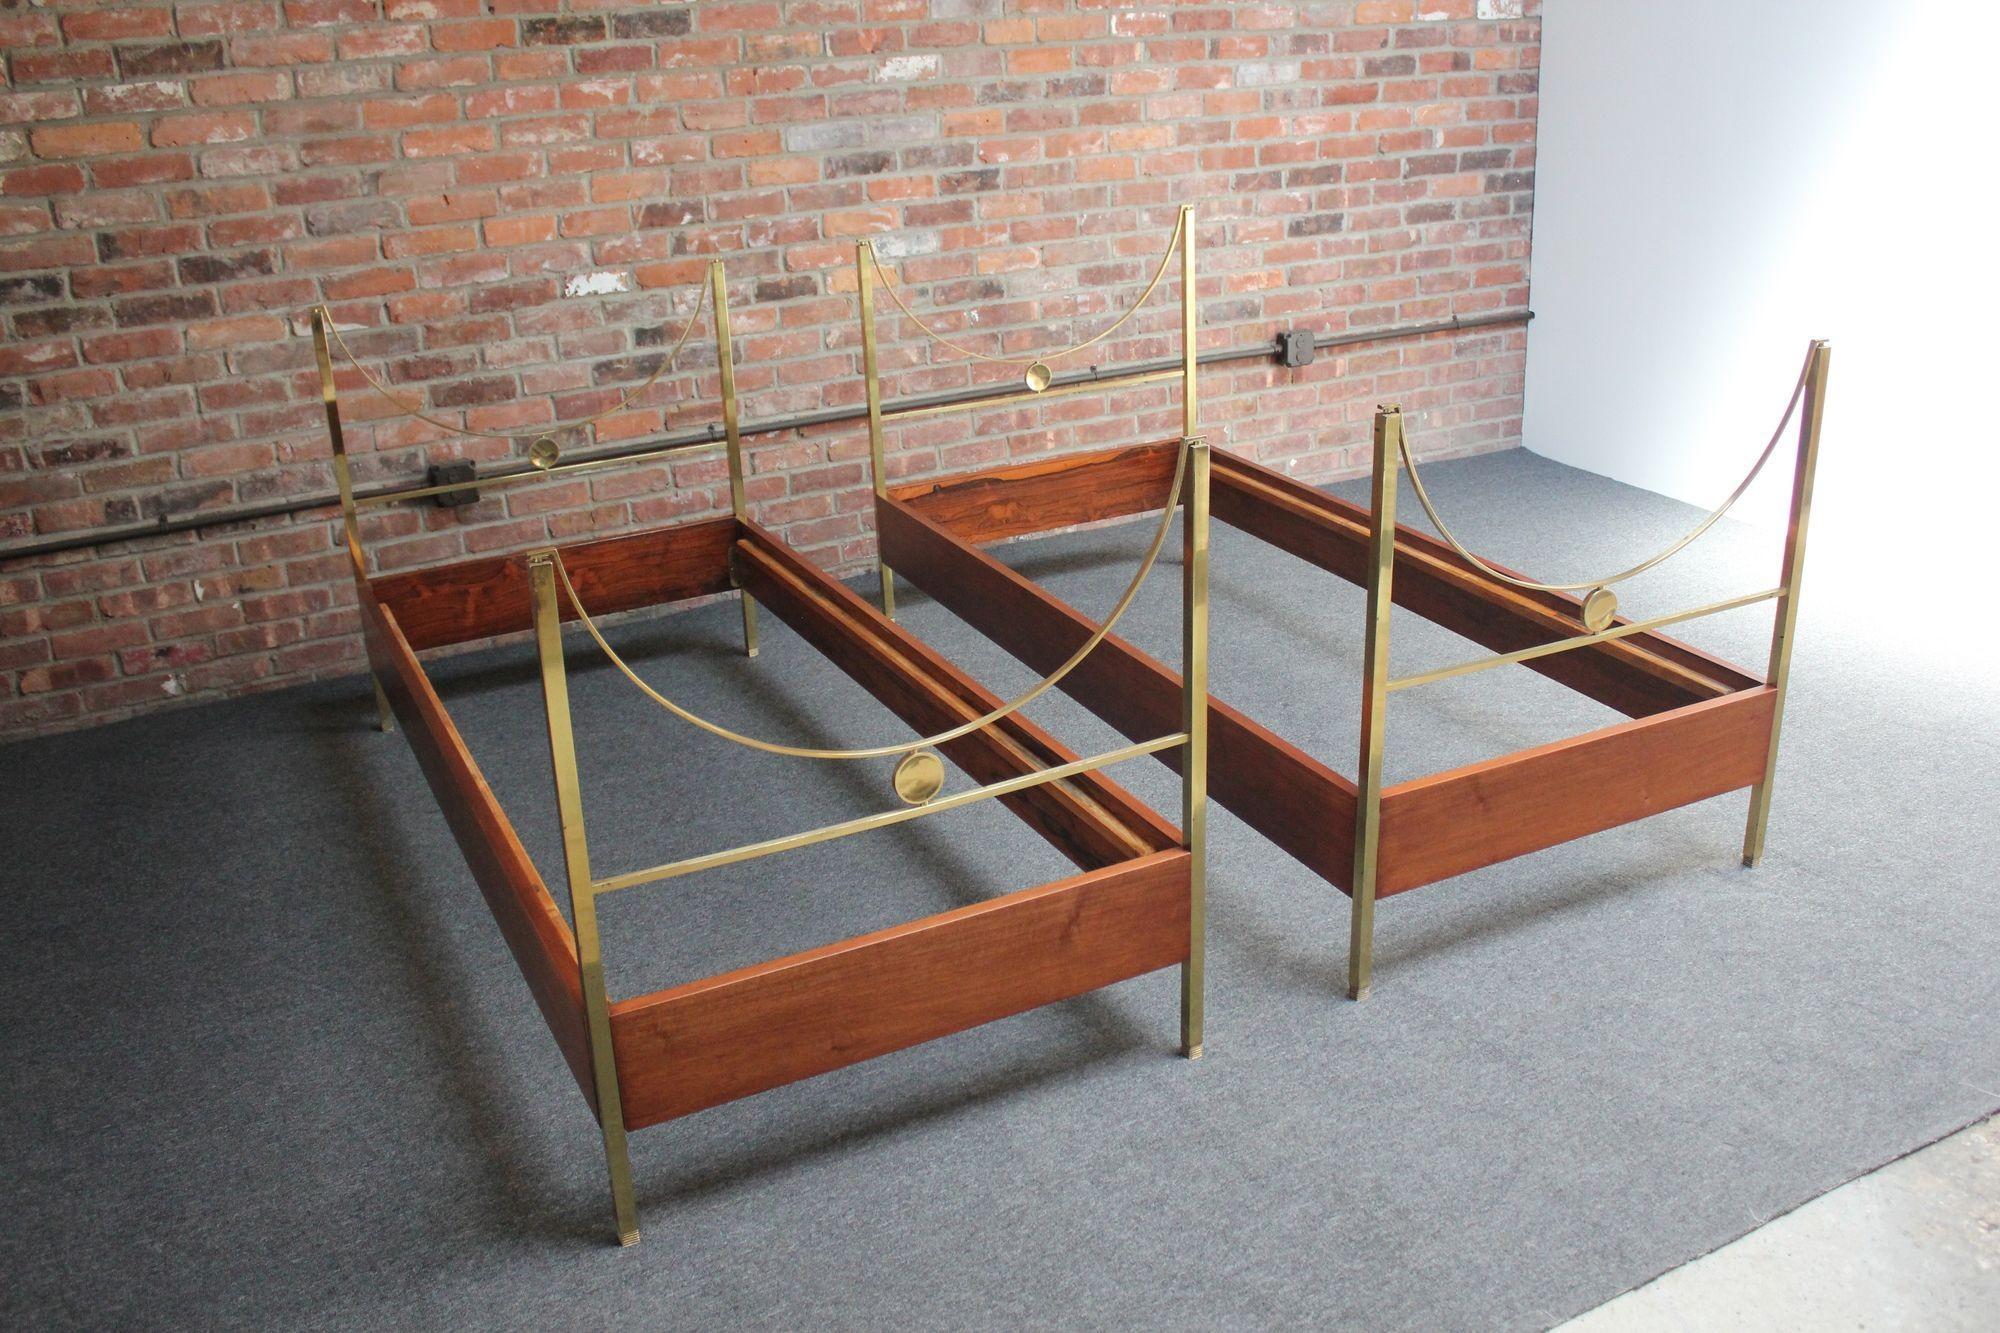 Pair of Vintage Italian Mahogany and Brass Beds by Carlo de Carli for Sormani For Sale 11